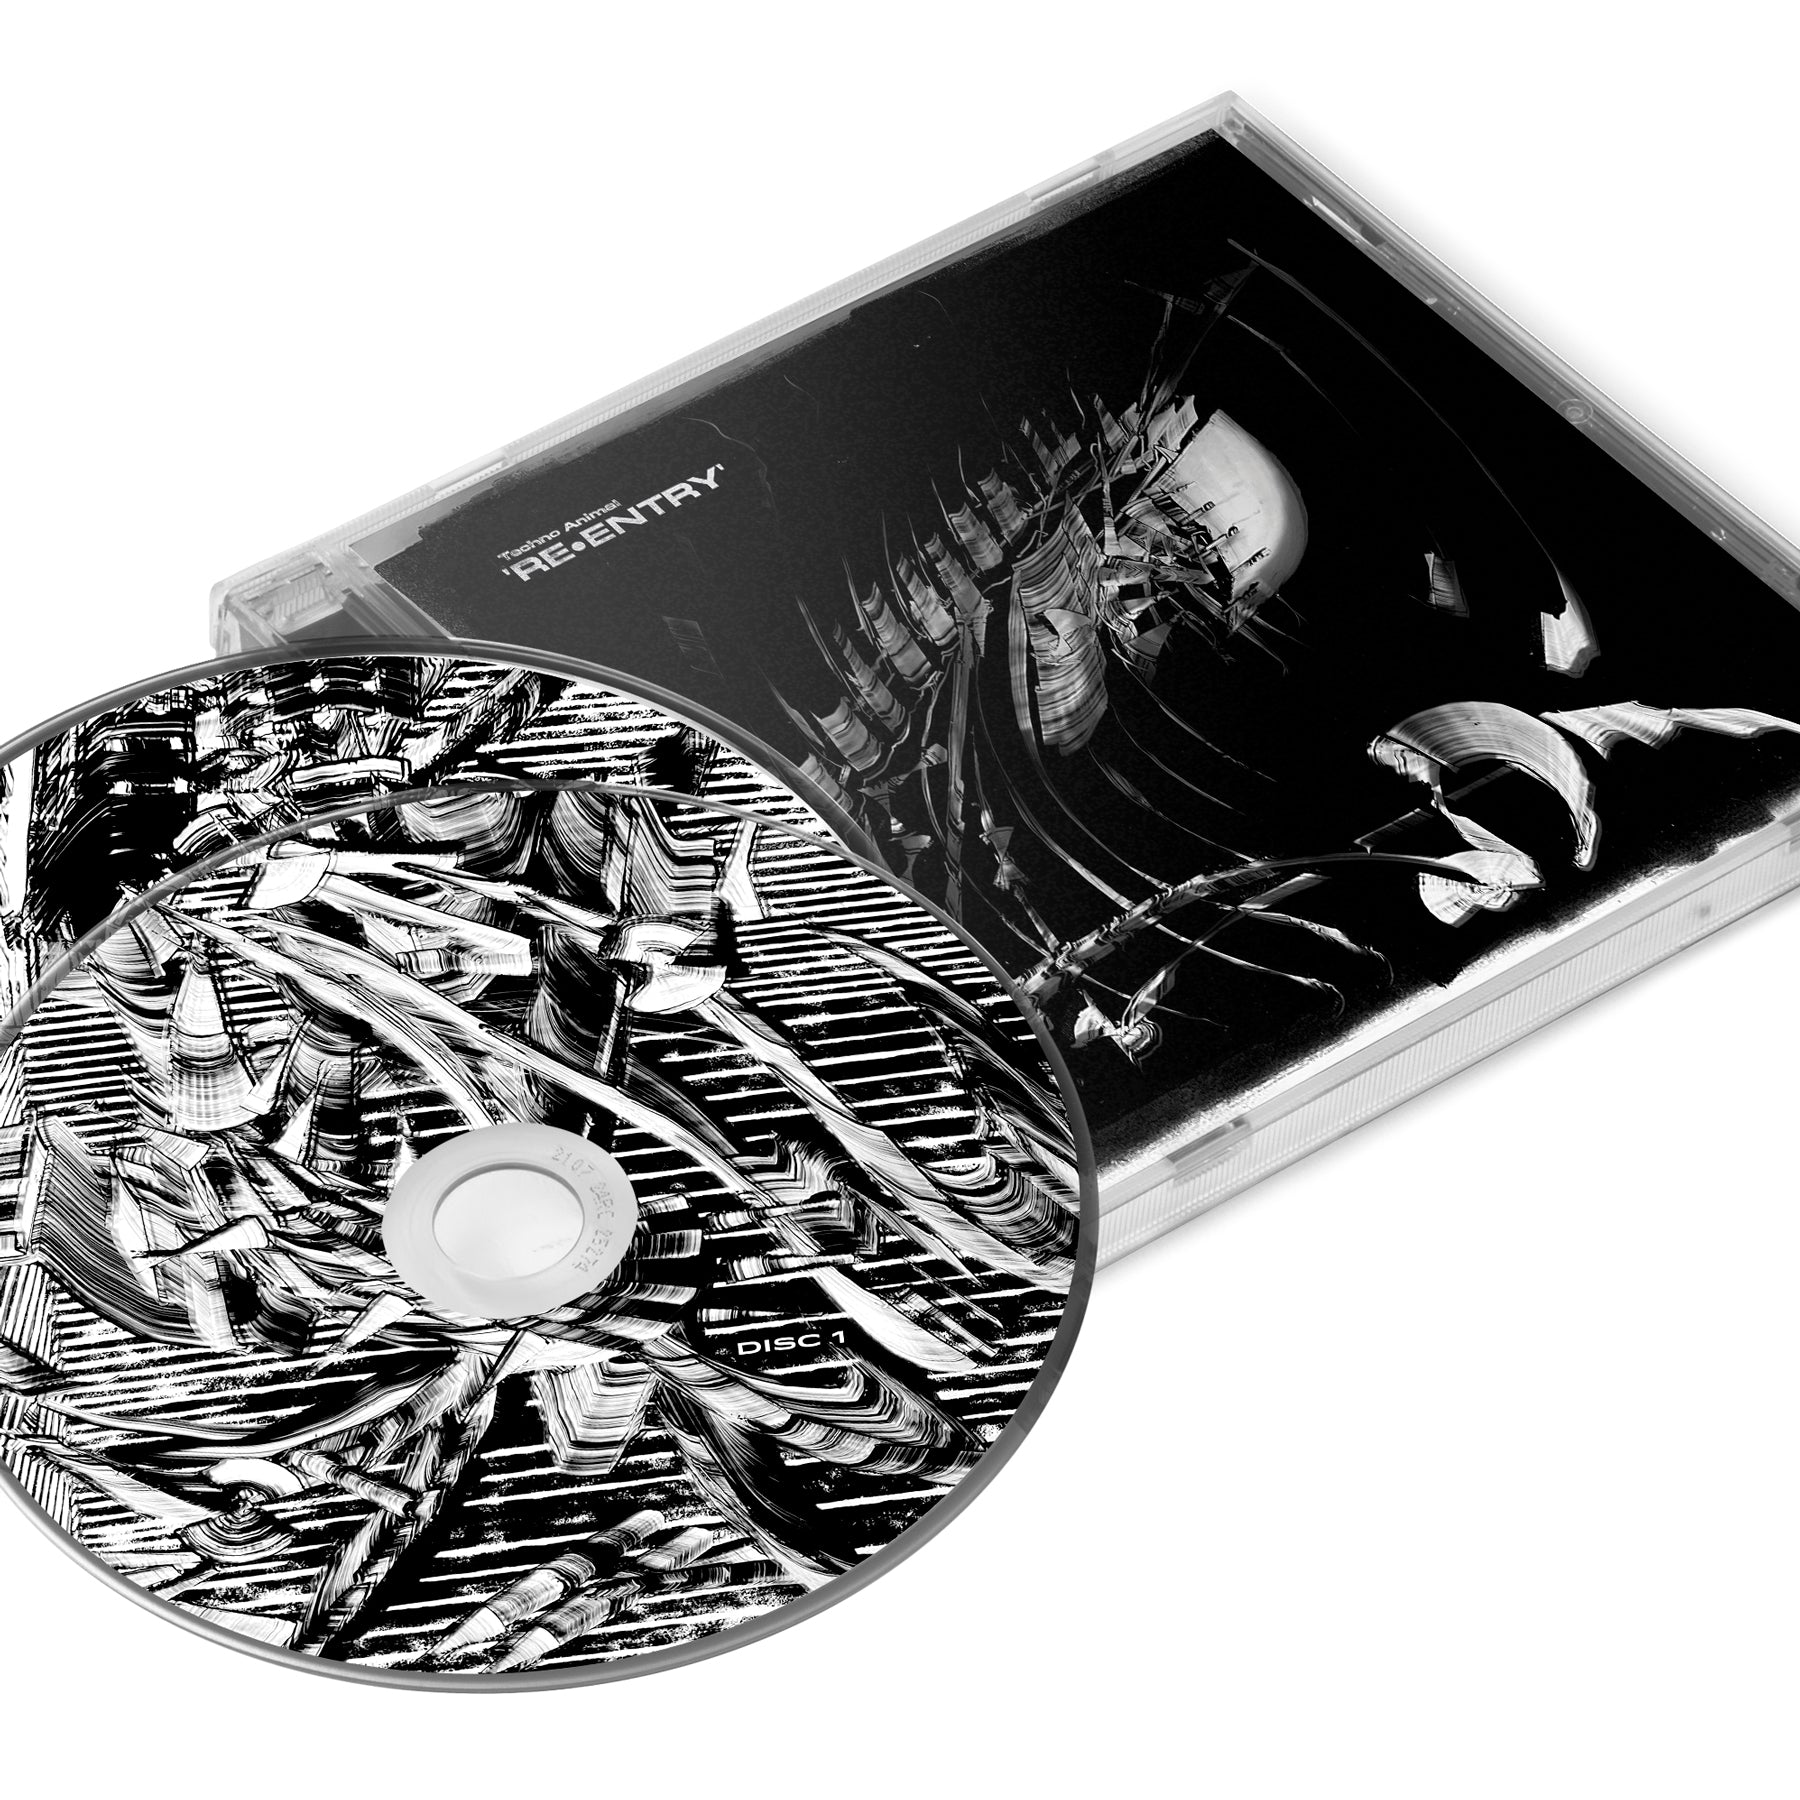 Techno Animal "Re-Entry" 2xCD